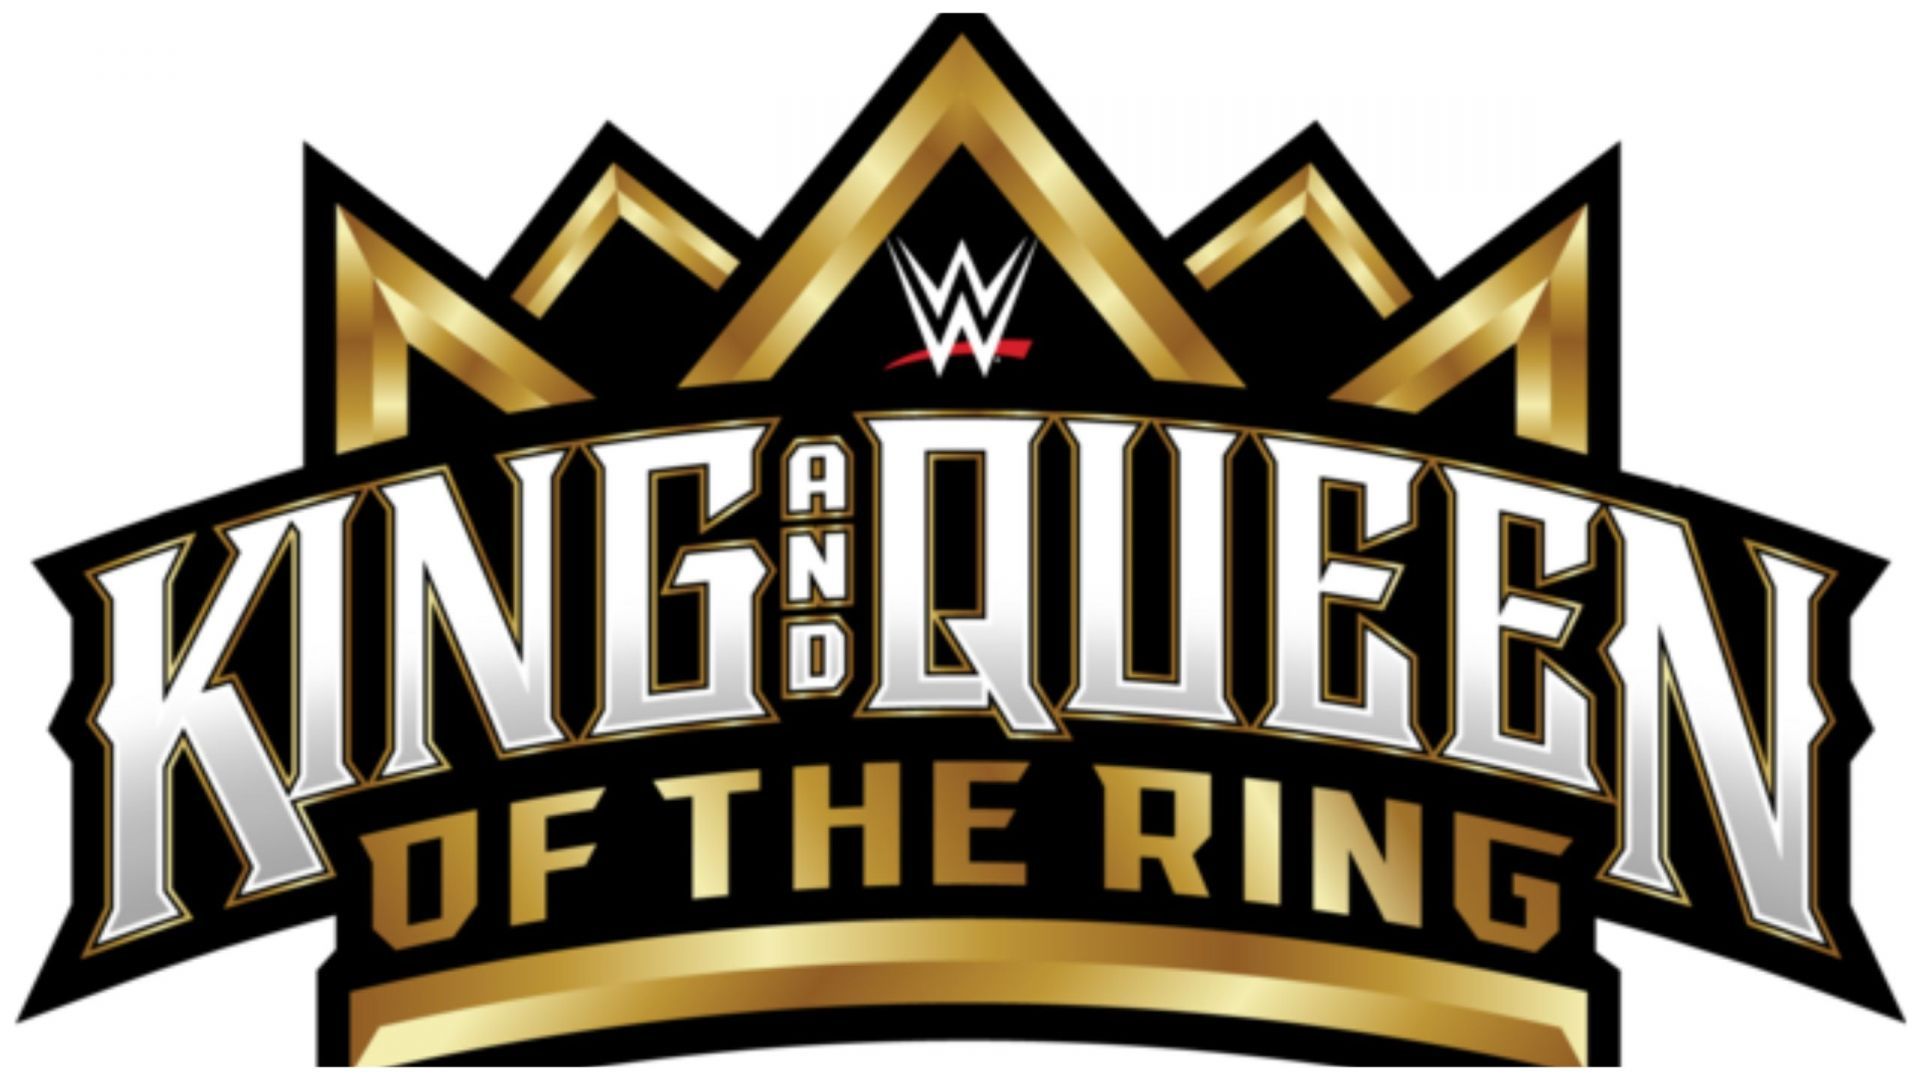 WWE Premium Live Event King and Queen of the Ring will take place on Saturday, May 25th (Photo credit: WWE.com)